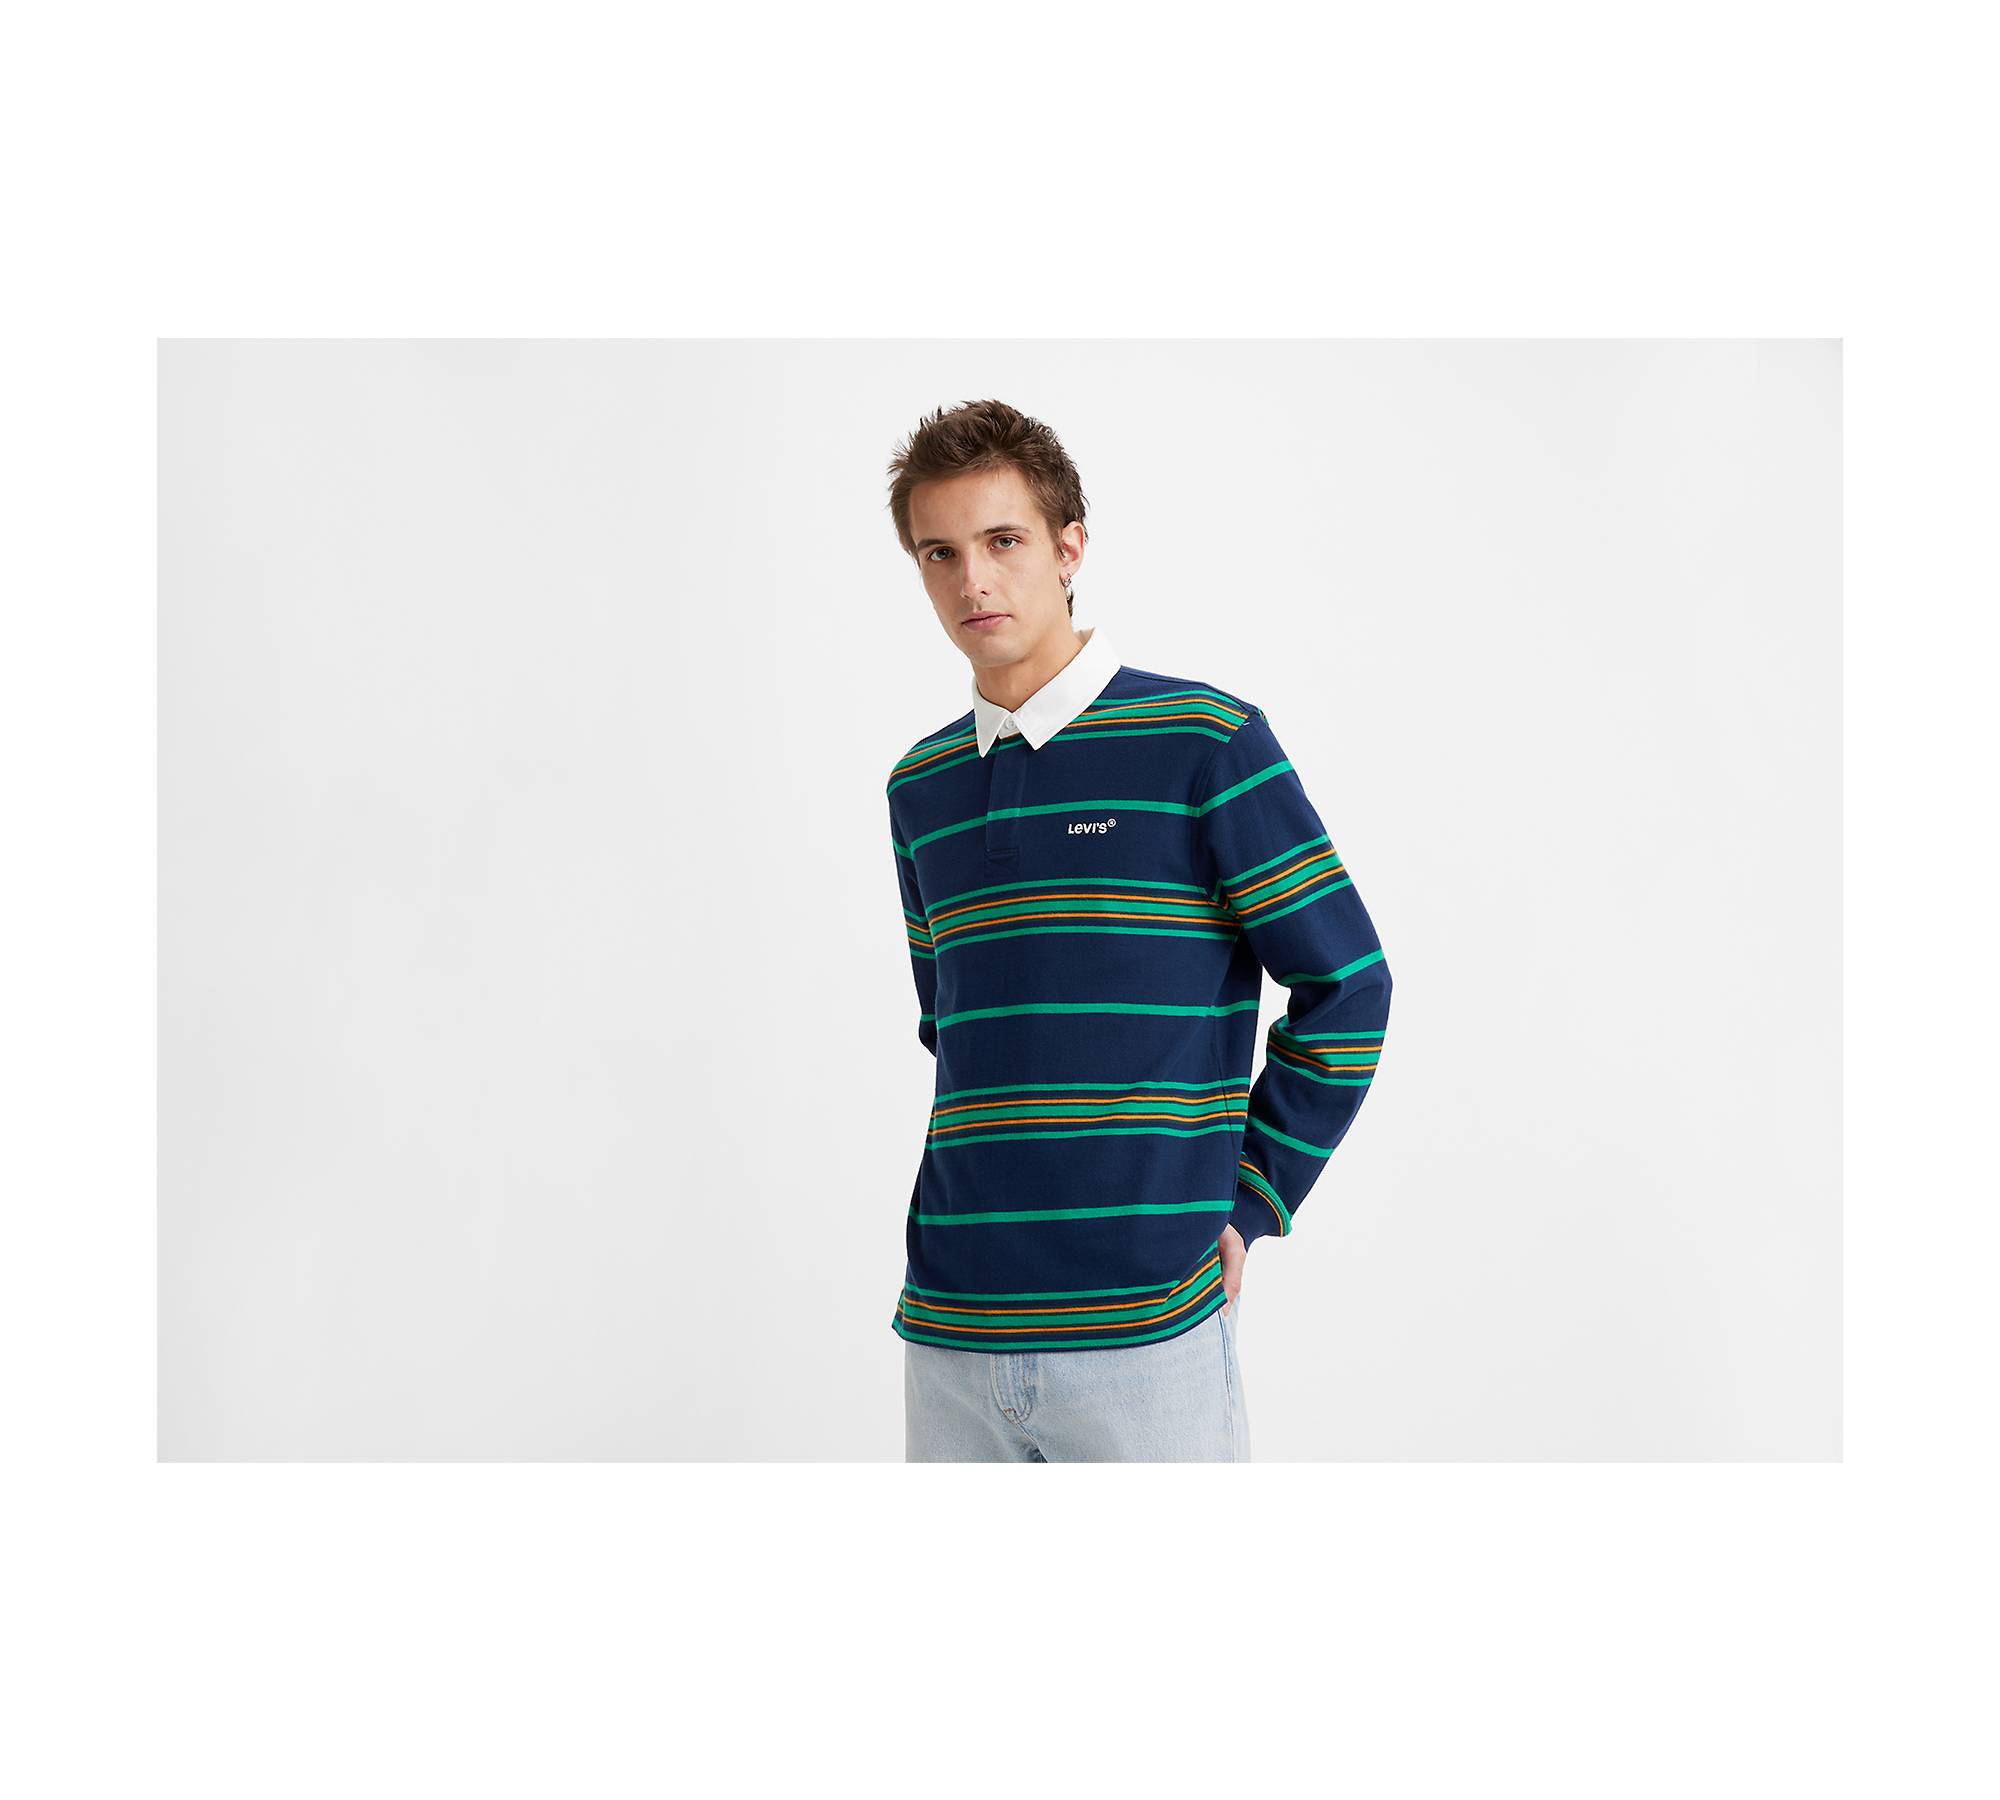 Union Rugby Polo Shirt - Multi-color